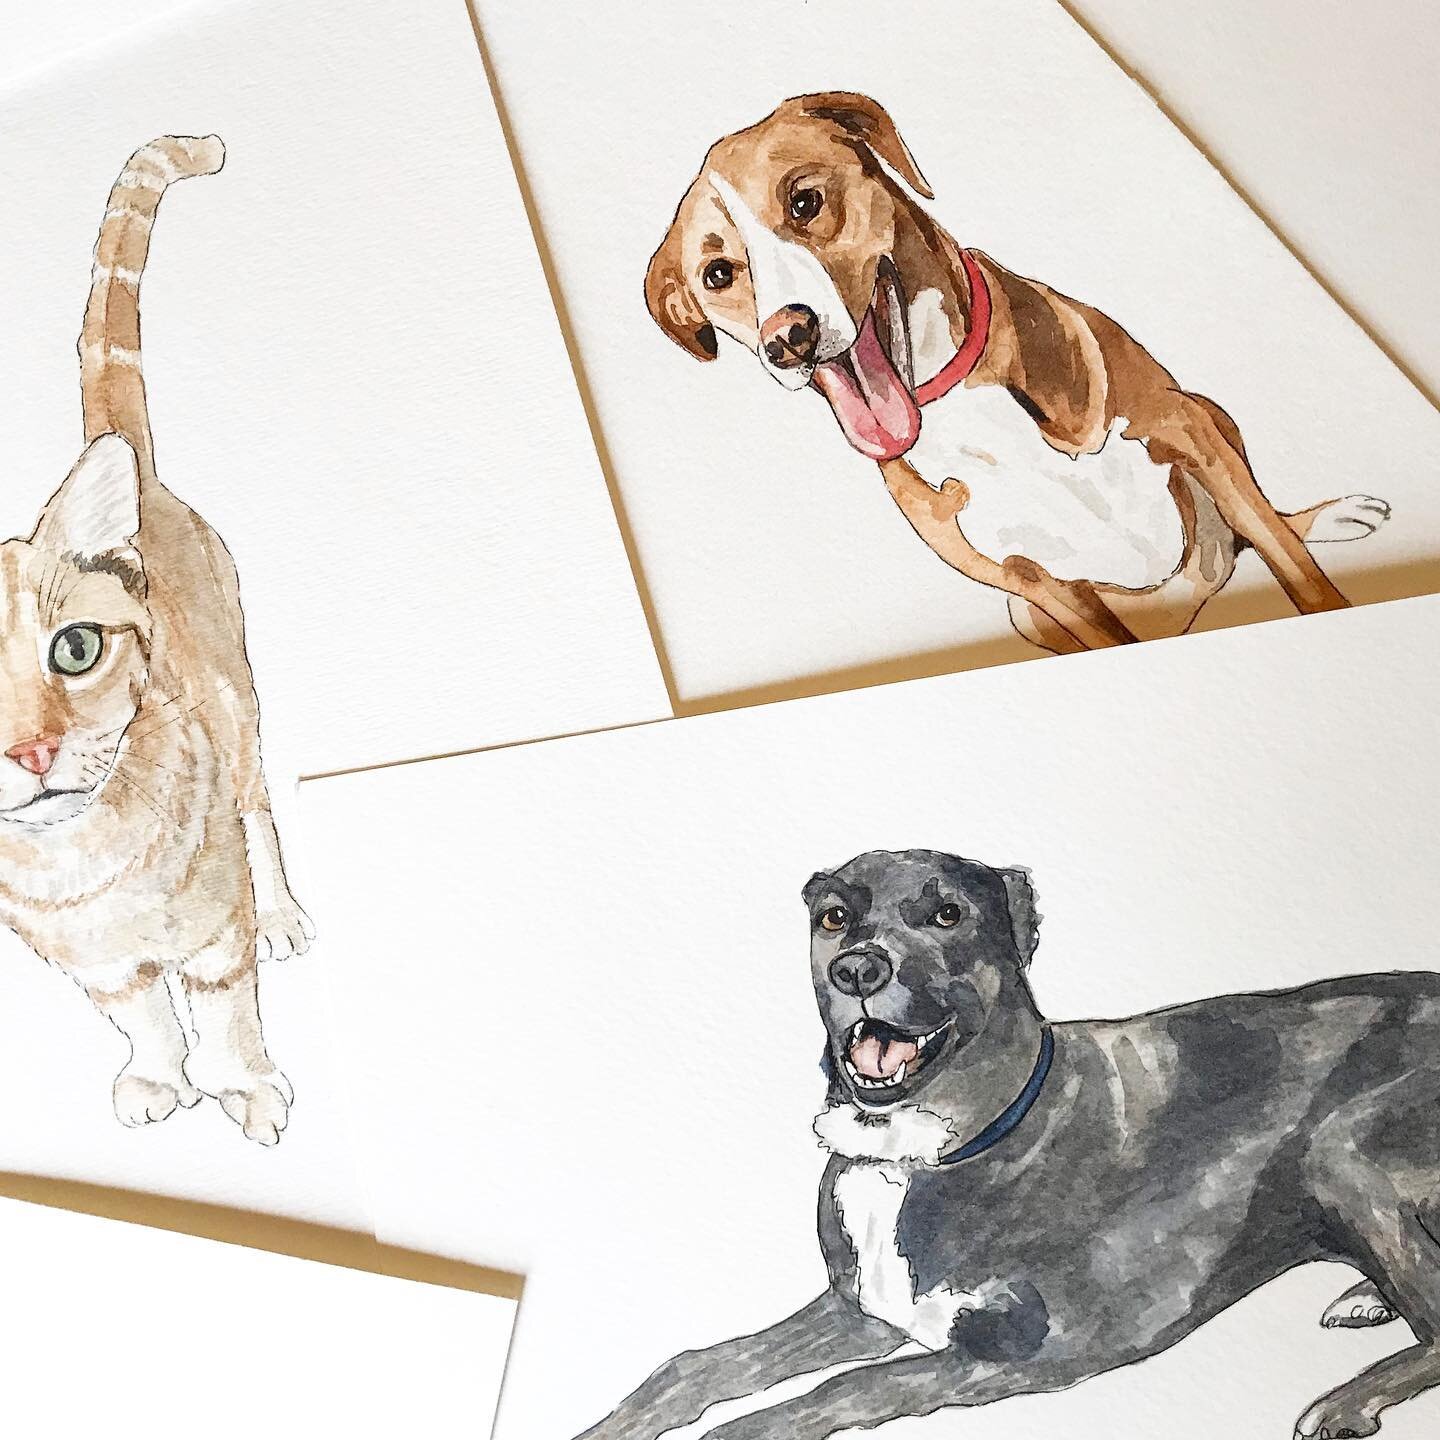 Throwback to my very first dog portraits that started them all. 🥰 

#watercolor #watercolorart #watercolorandink #birmingham #birminghamalabama #watercolorartist #petportrait #petportraitartist #petsofinstagram #dogsofinstagram #dogportrait #dogwate